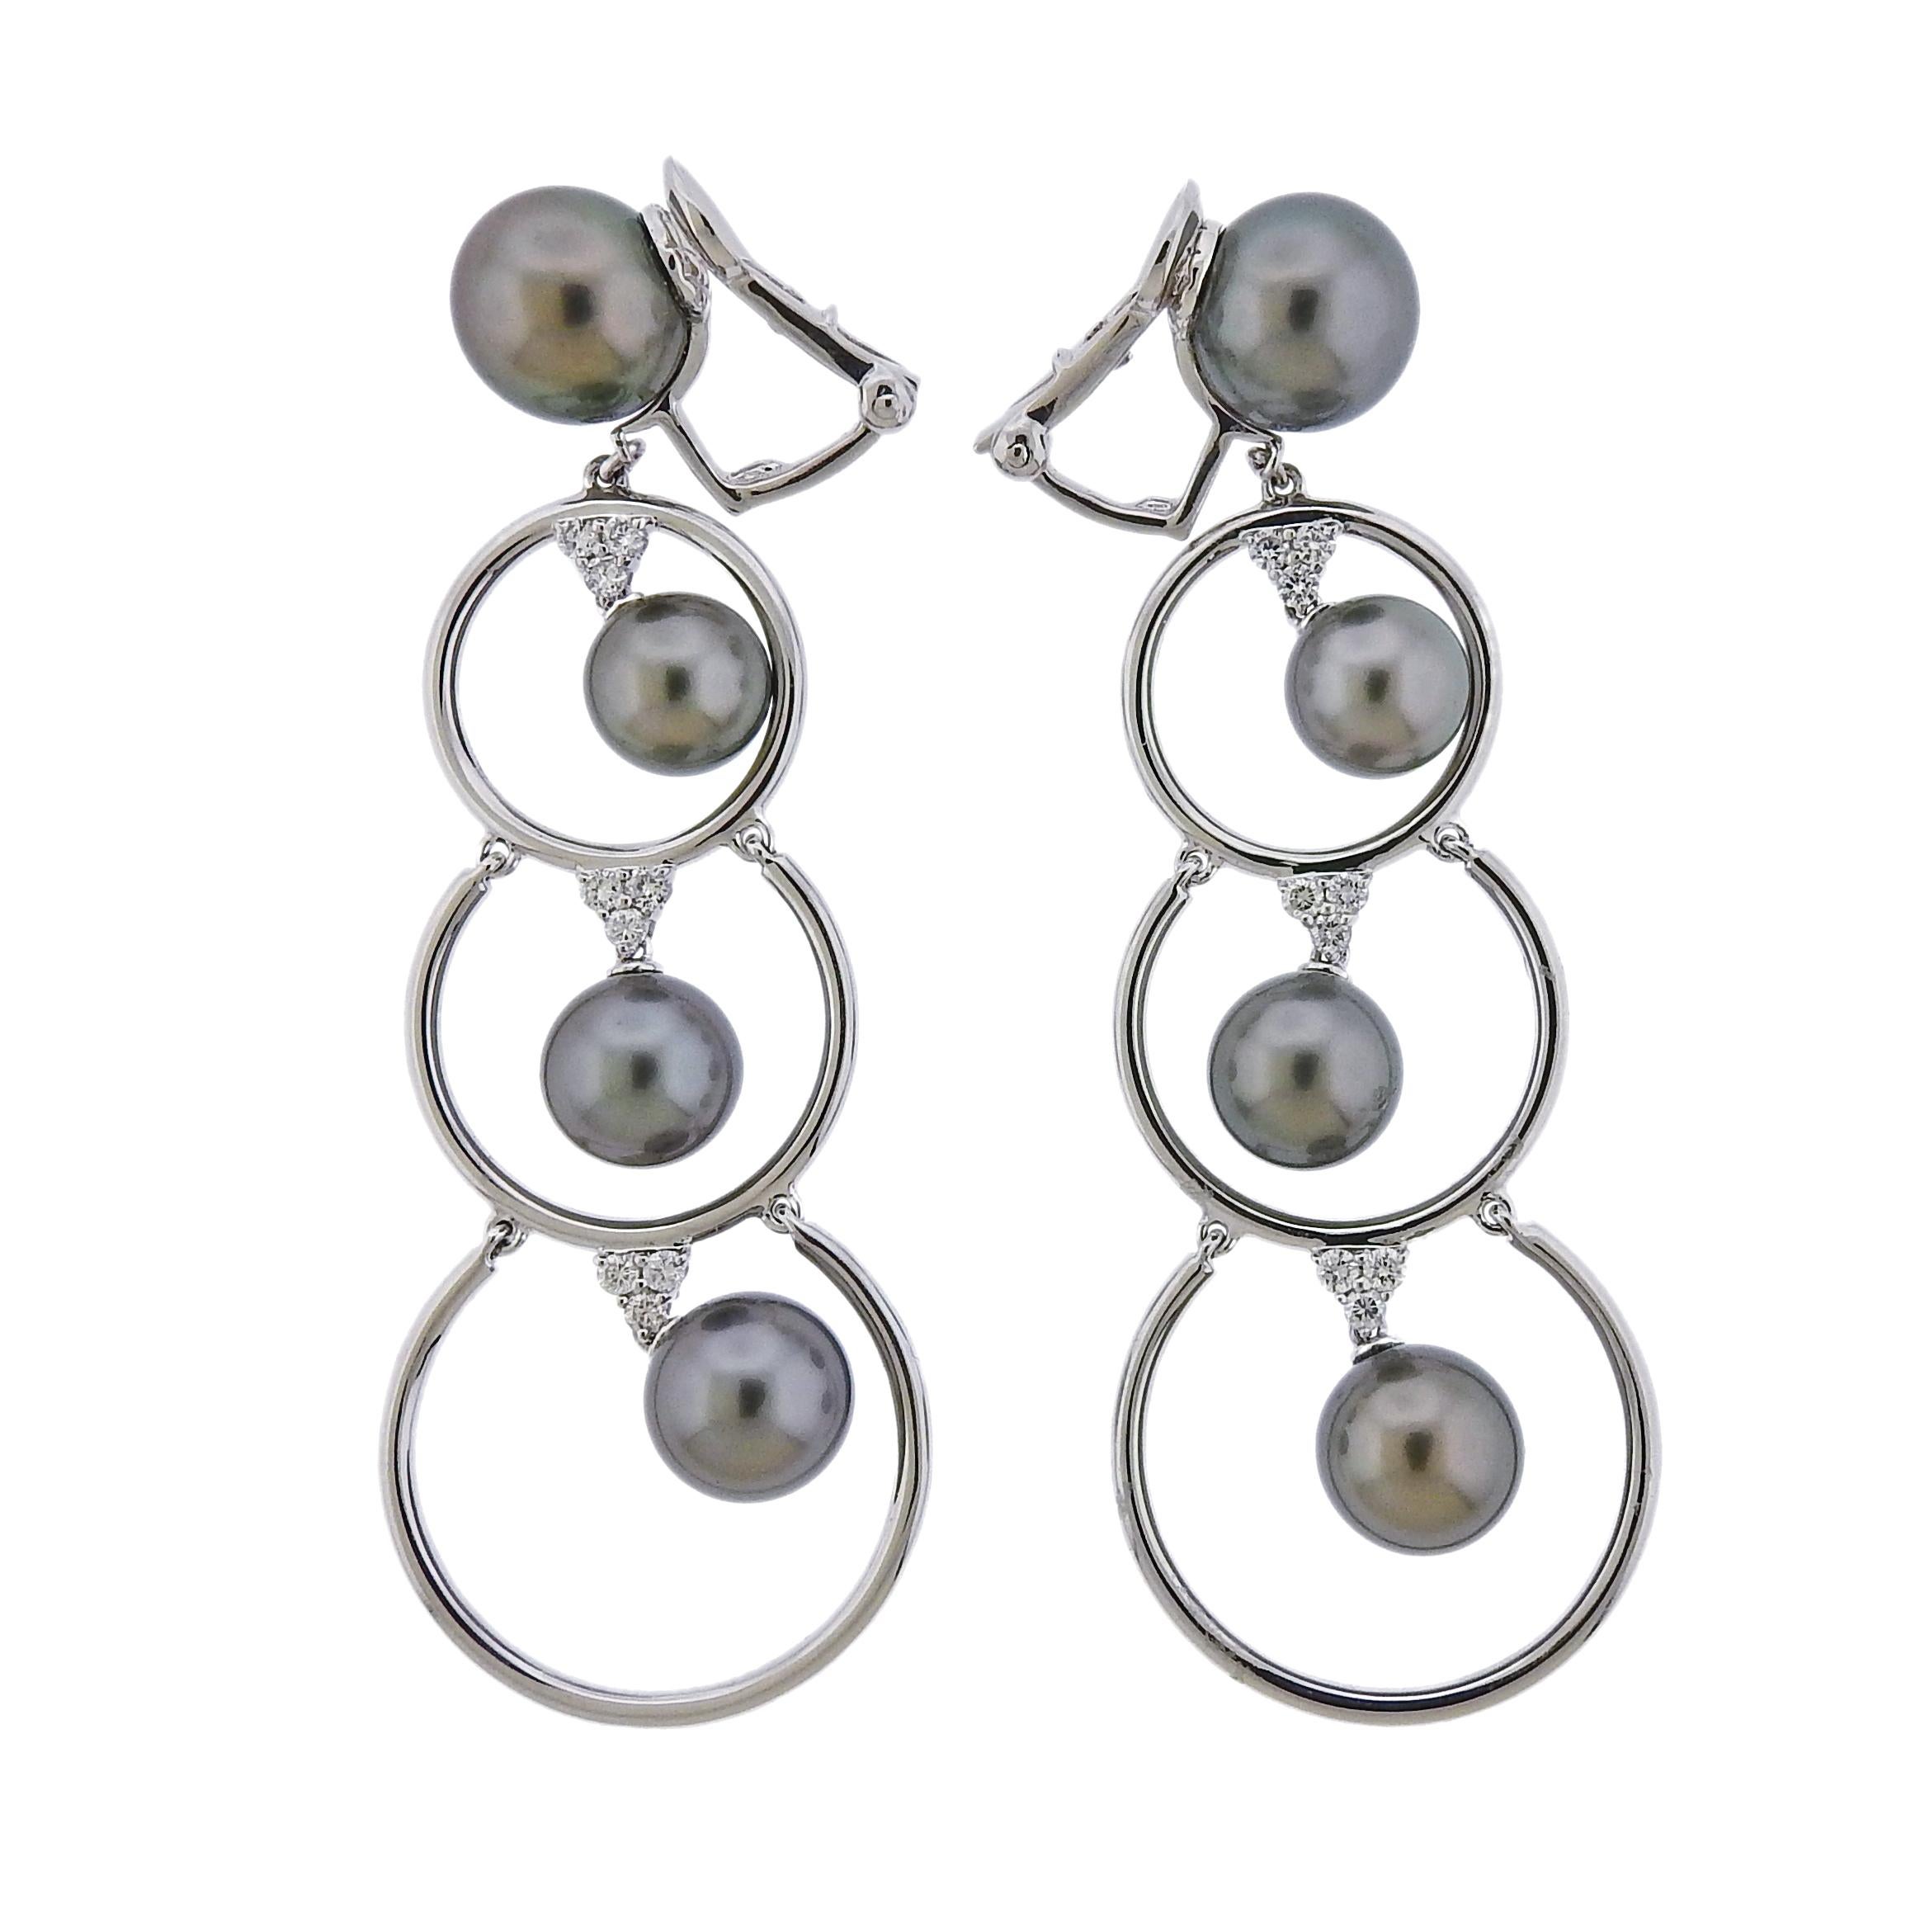 Brand new pair of 18k white gold long earrings by Assael for Prince Dimitri, set with 8.5mm - 10.5mm Tahitian pearls and 0.55ctw in G/VS diamonds. Retail $8100.  Earrings are 72mm x 25mm.  Weigh 26.5 grams. Marked: 18k, 750 3.